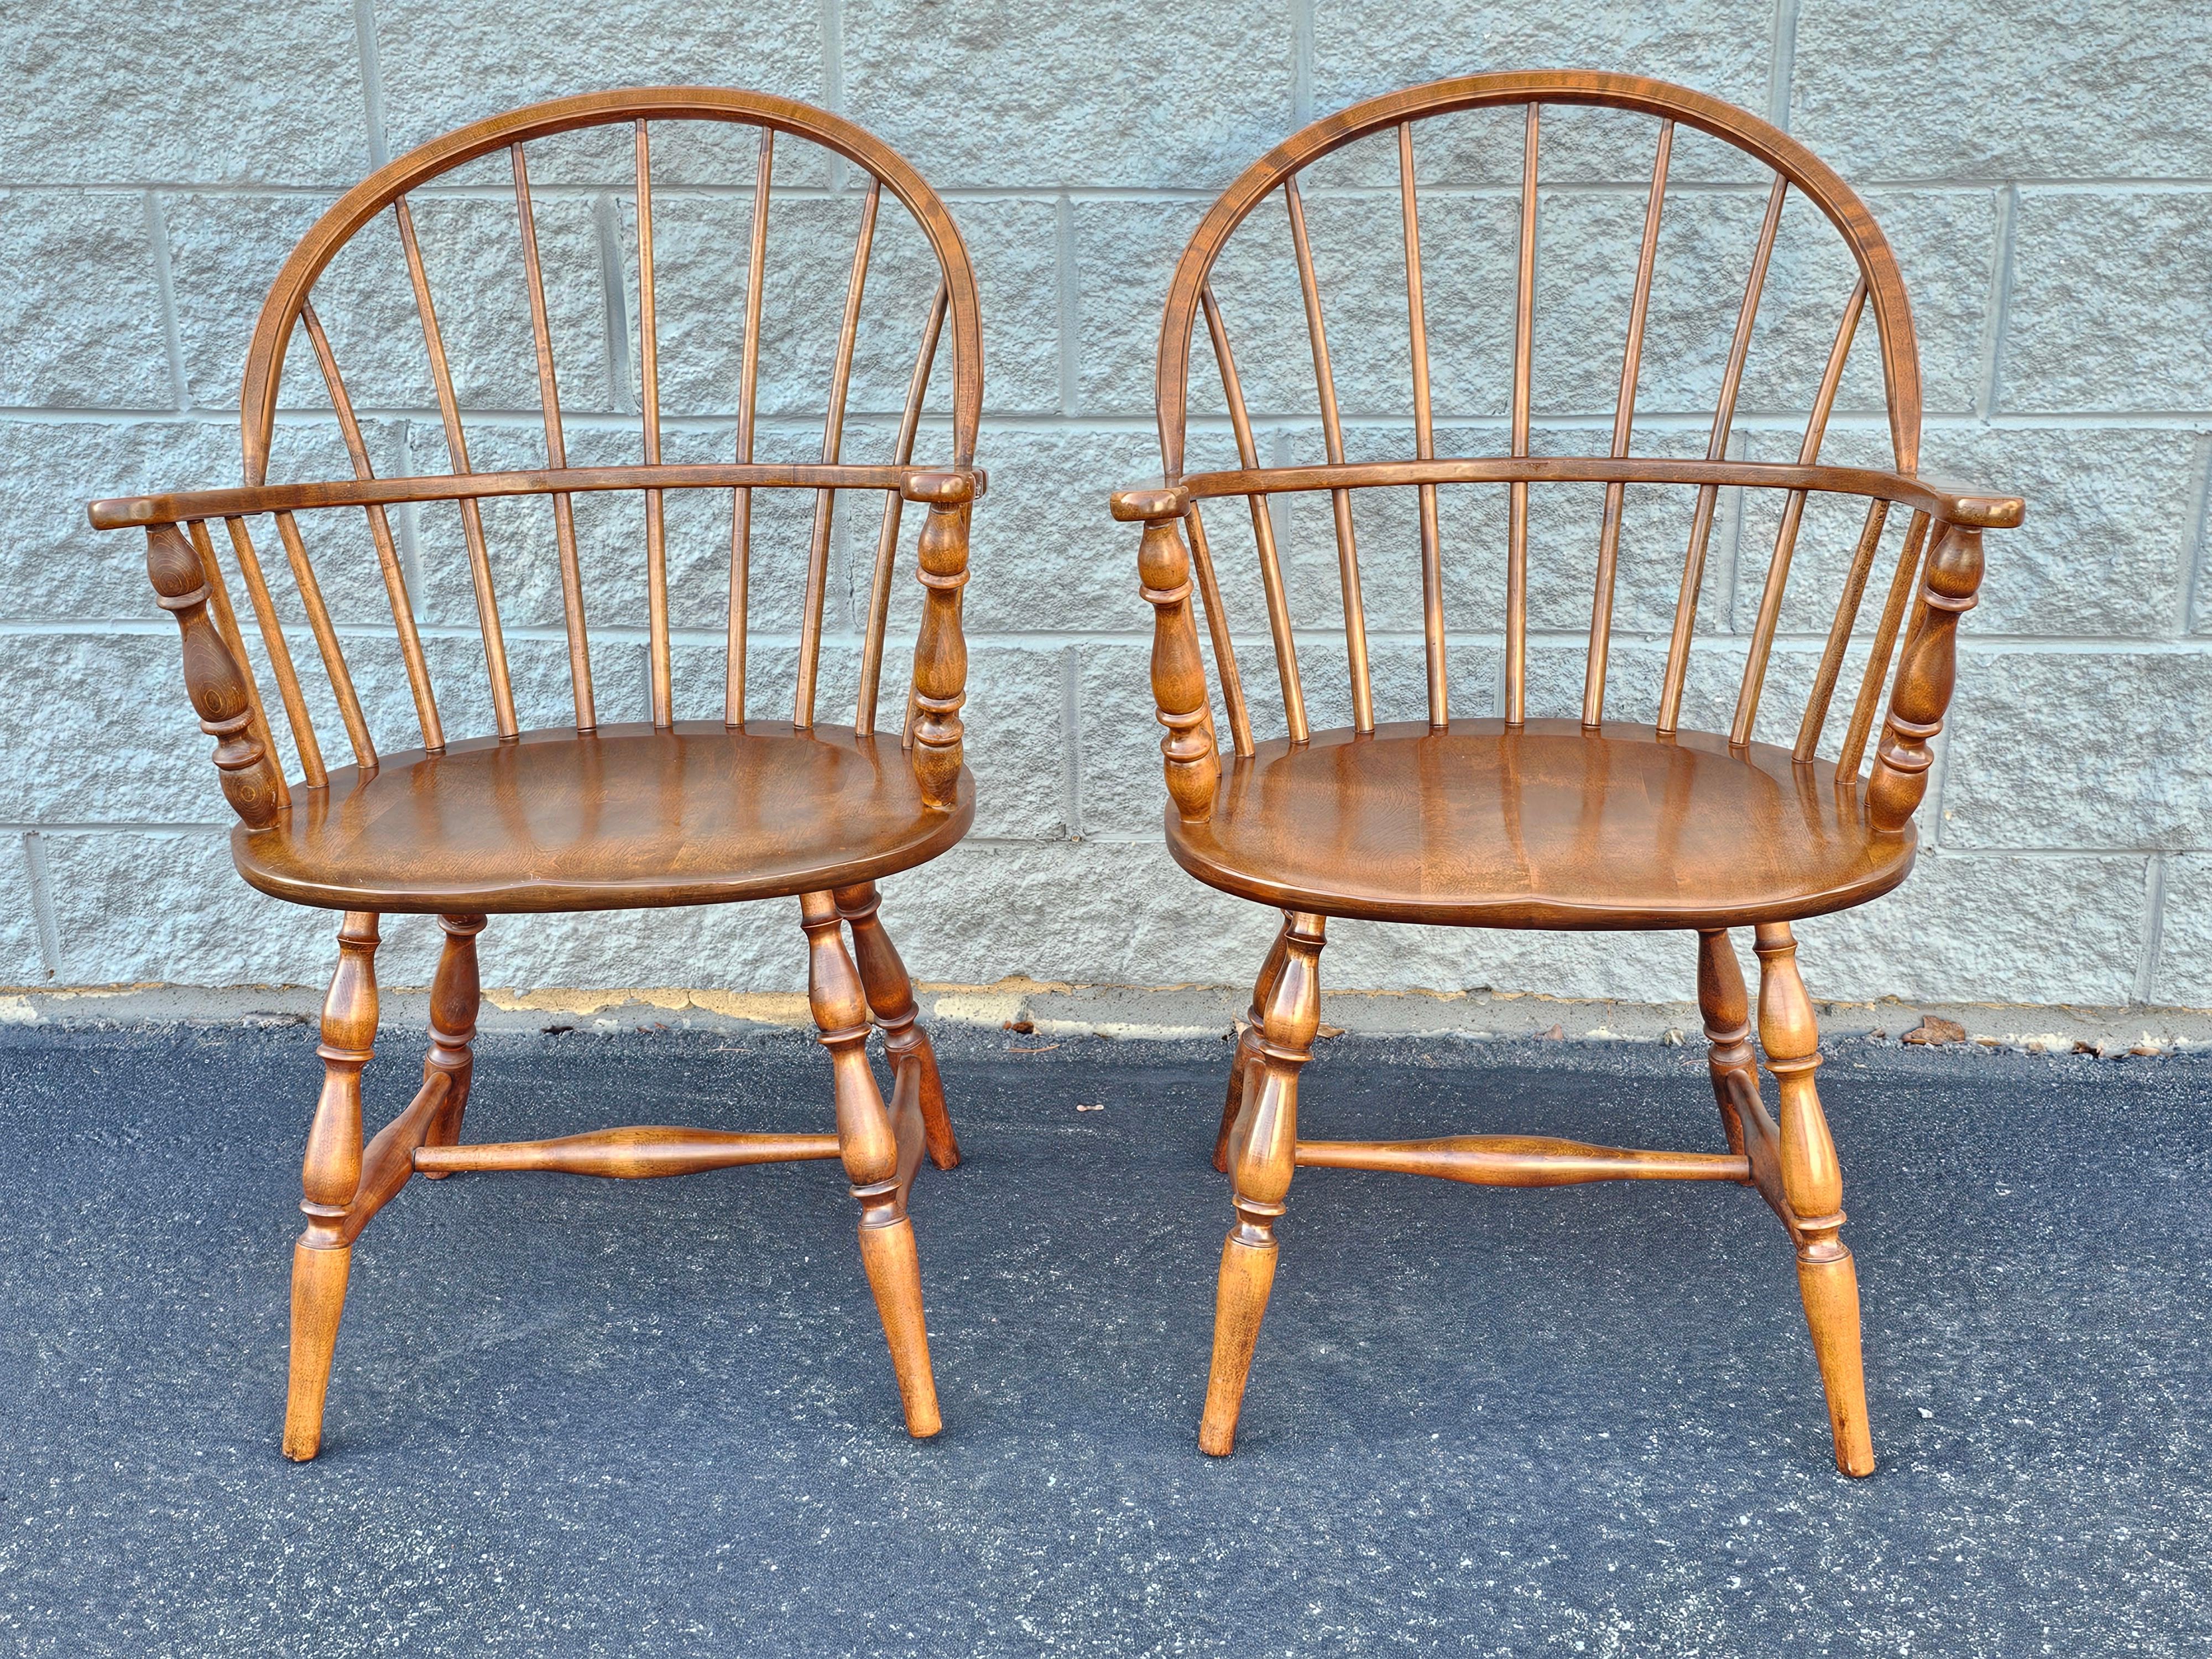 Set of Four Country English maple Hoop Back Windsor Armchairs handcrafted by the Amish artisans in Pennsylvania in the mid 20th century. Chairs were recently refinished  and look gorgeous. Measures 23.25